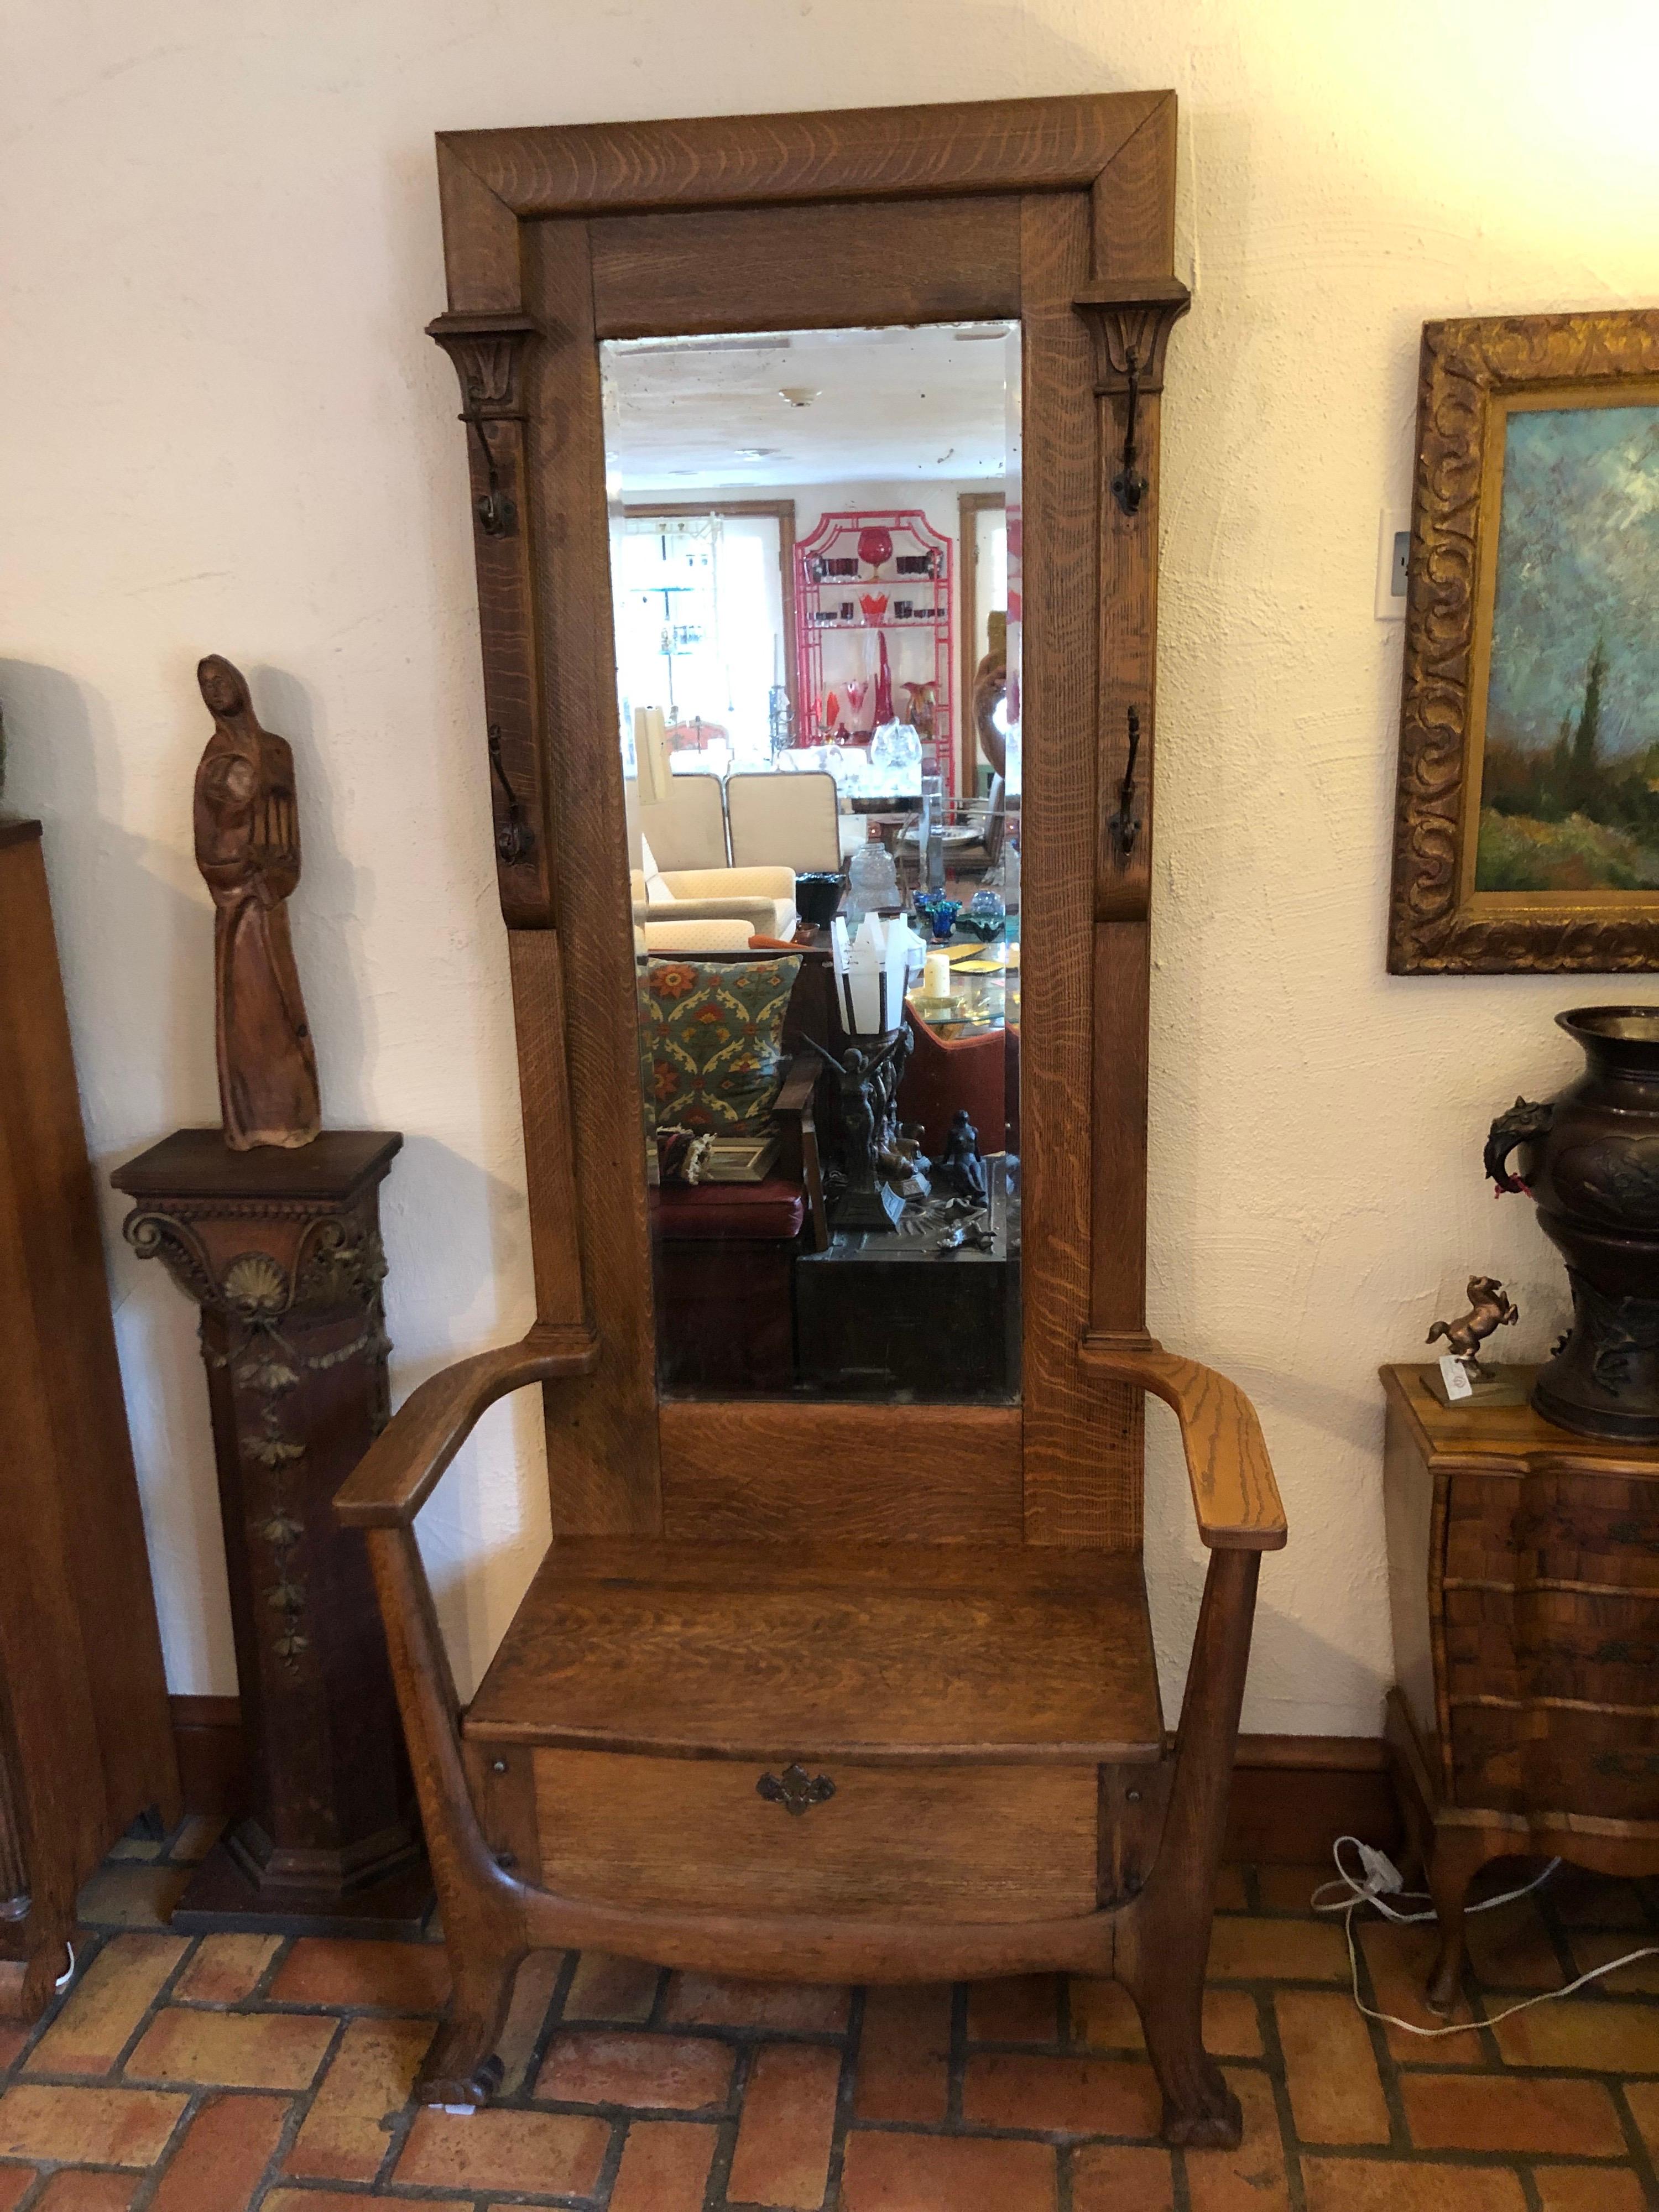 Antique oak hall tree with mirror. The perfect mudroon or front entryway piece to hold your coats, umbrellas and be able to sit down and put your boots on. Storage under seat thatlifts up. Four hooks and the original beveled mercury glass mirror.